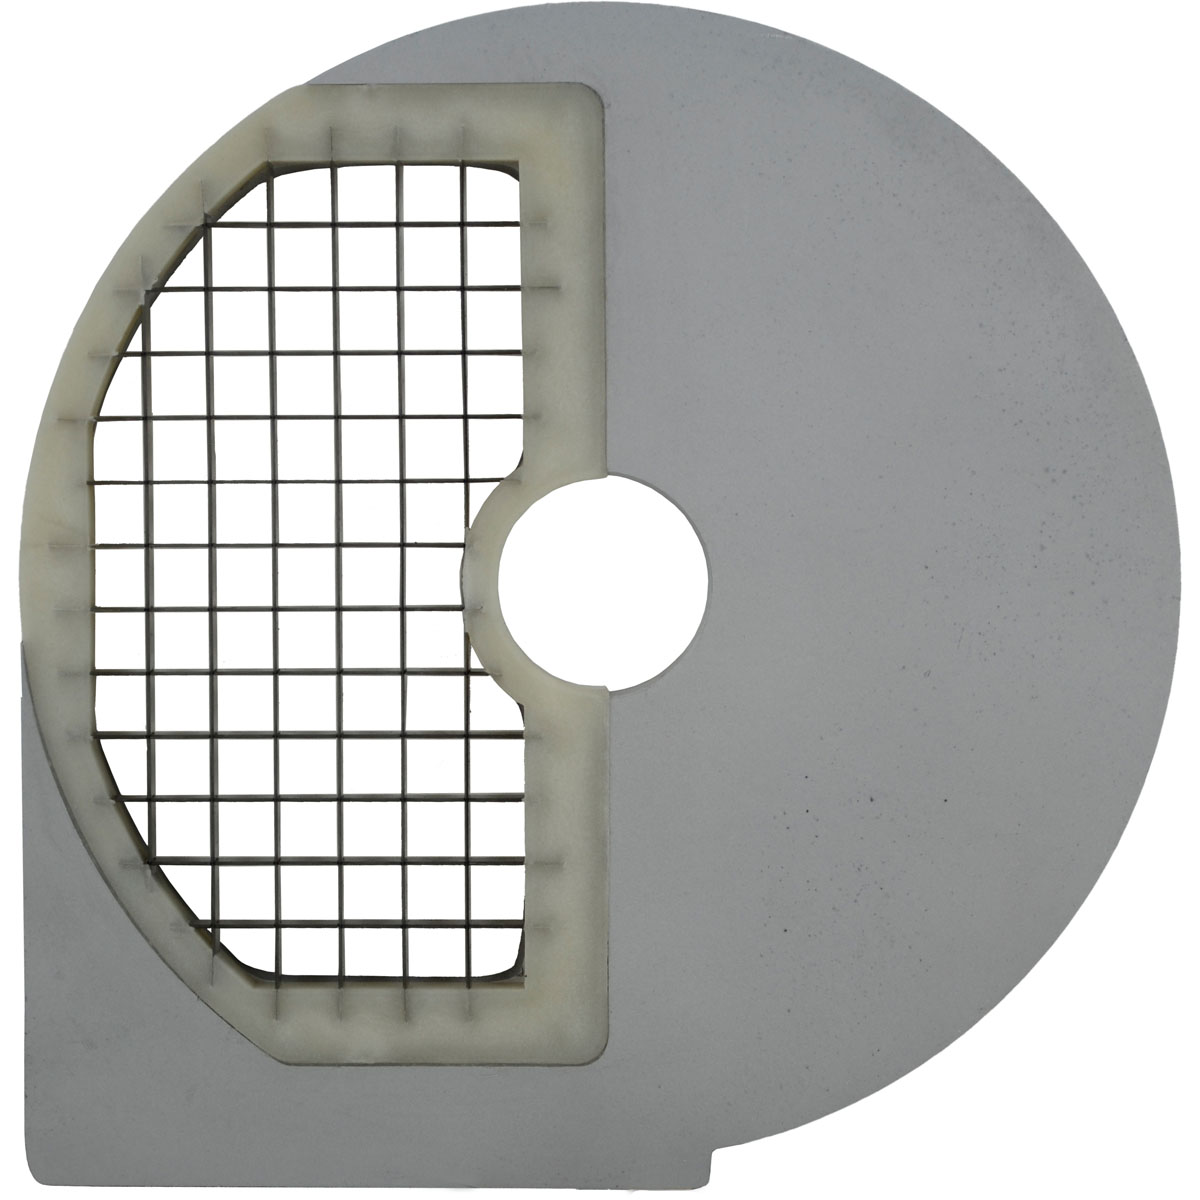 Skyfood GC12 Dicing Disc Plate for Master Sky Food Processor